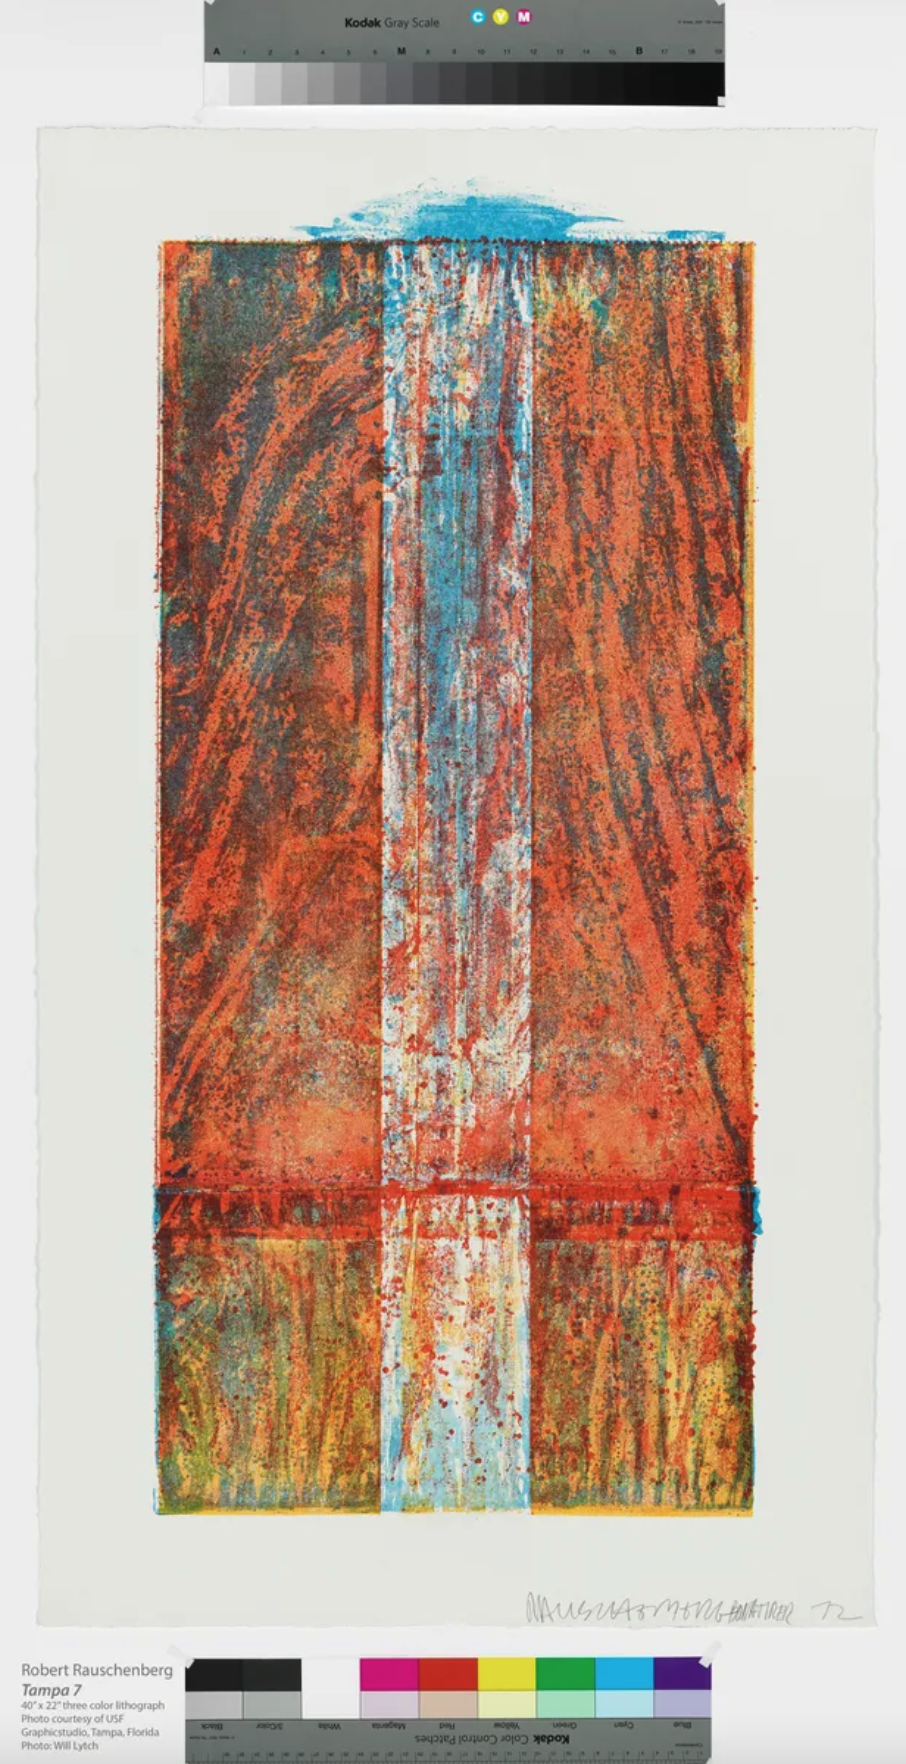 The late Robert Rauschenberg made this three-color lithograph, 